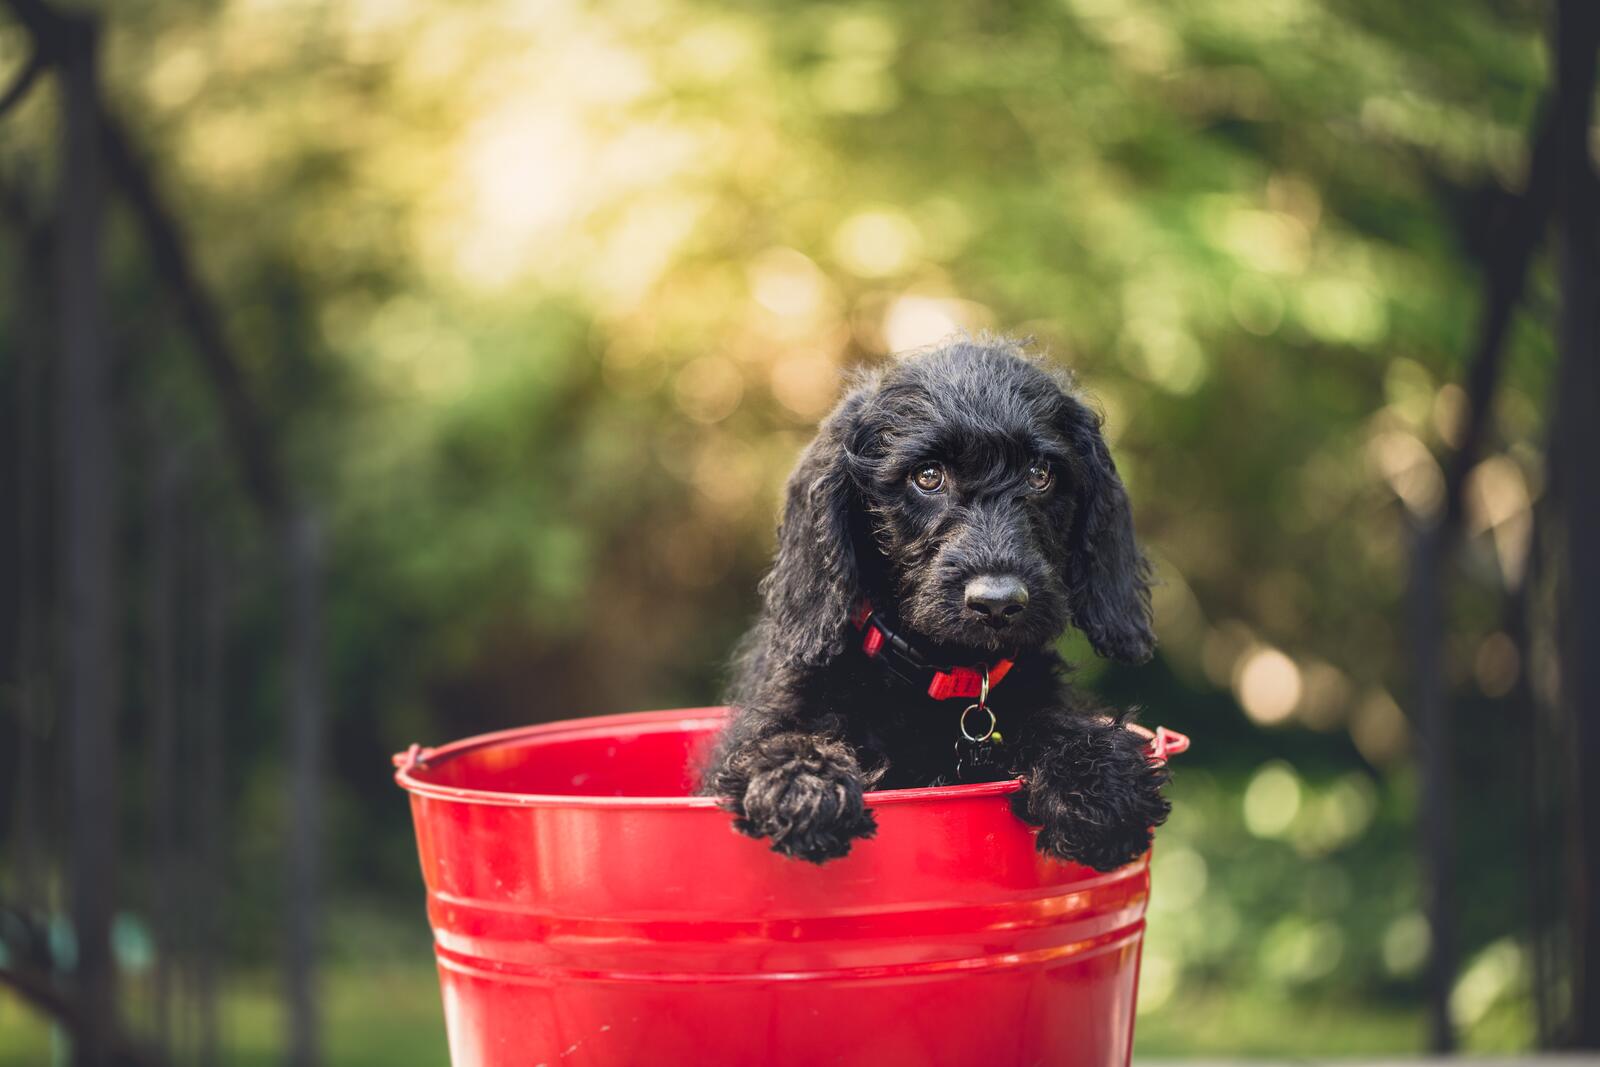 Free photo A black dog sits in a red bucket